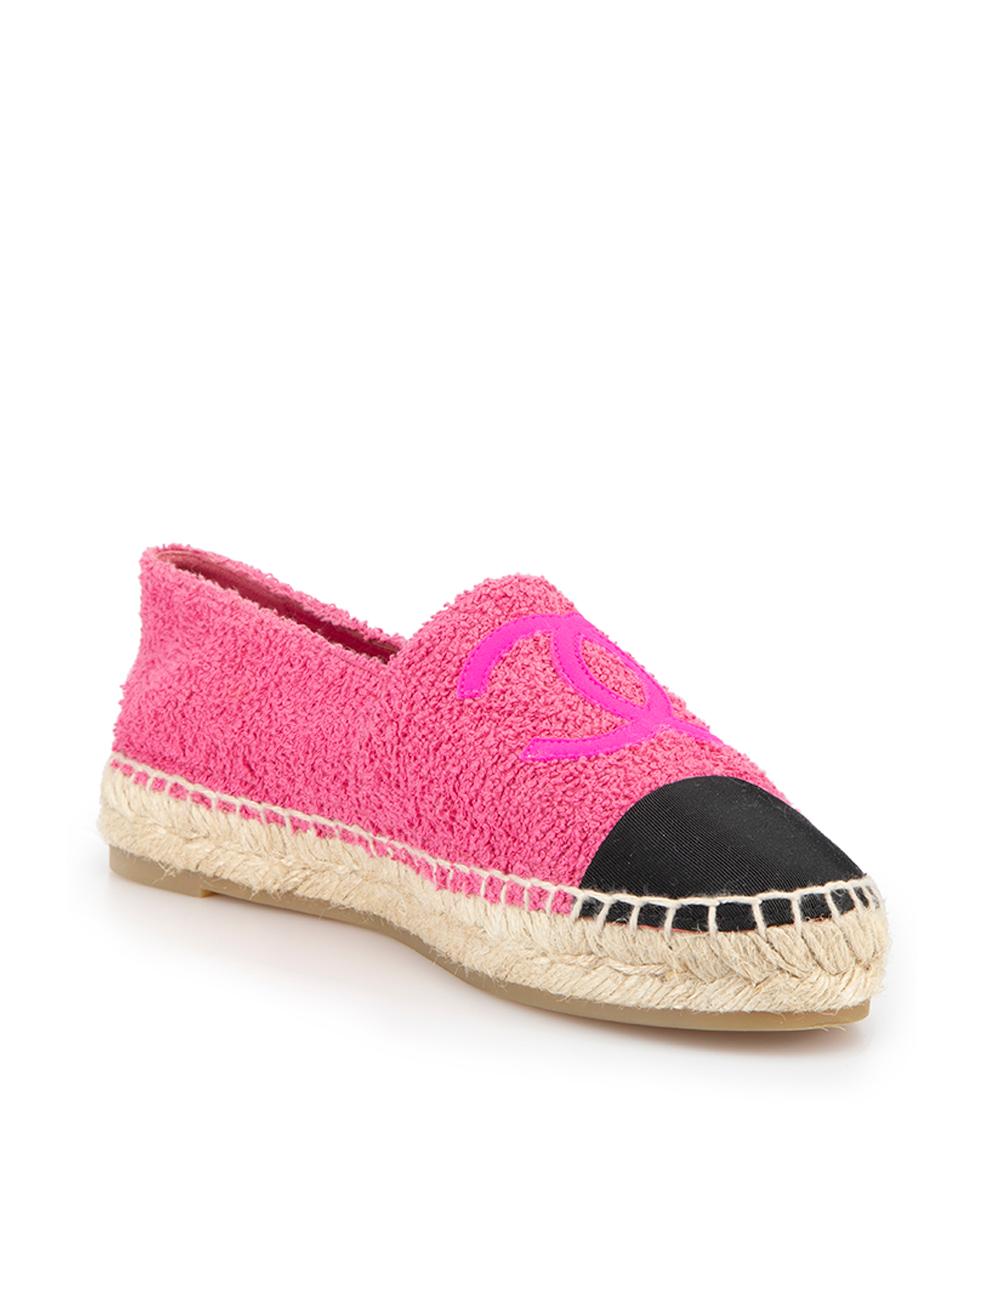 CONDITION is Very good. Hardly any visible wear to espadrilles is evident on this used Chanel designer resale item. This item includes the original shoebox.



Details


Pink

Cloth textile

Espadrilles

Towel textured

Round toe

Flatform heel

CC